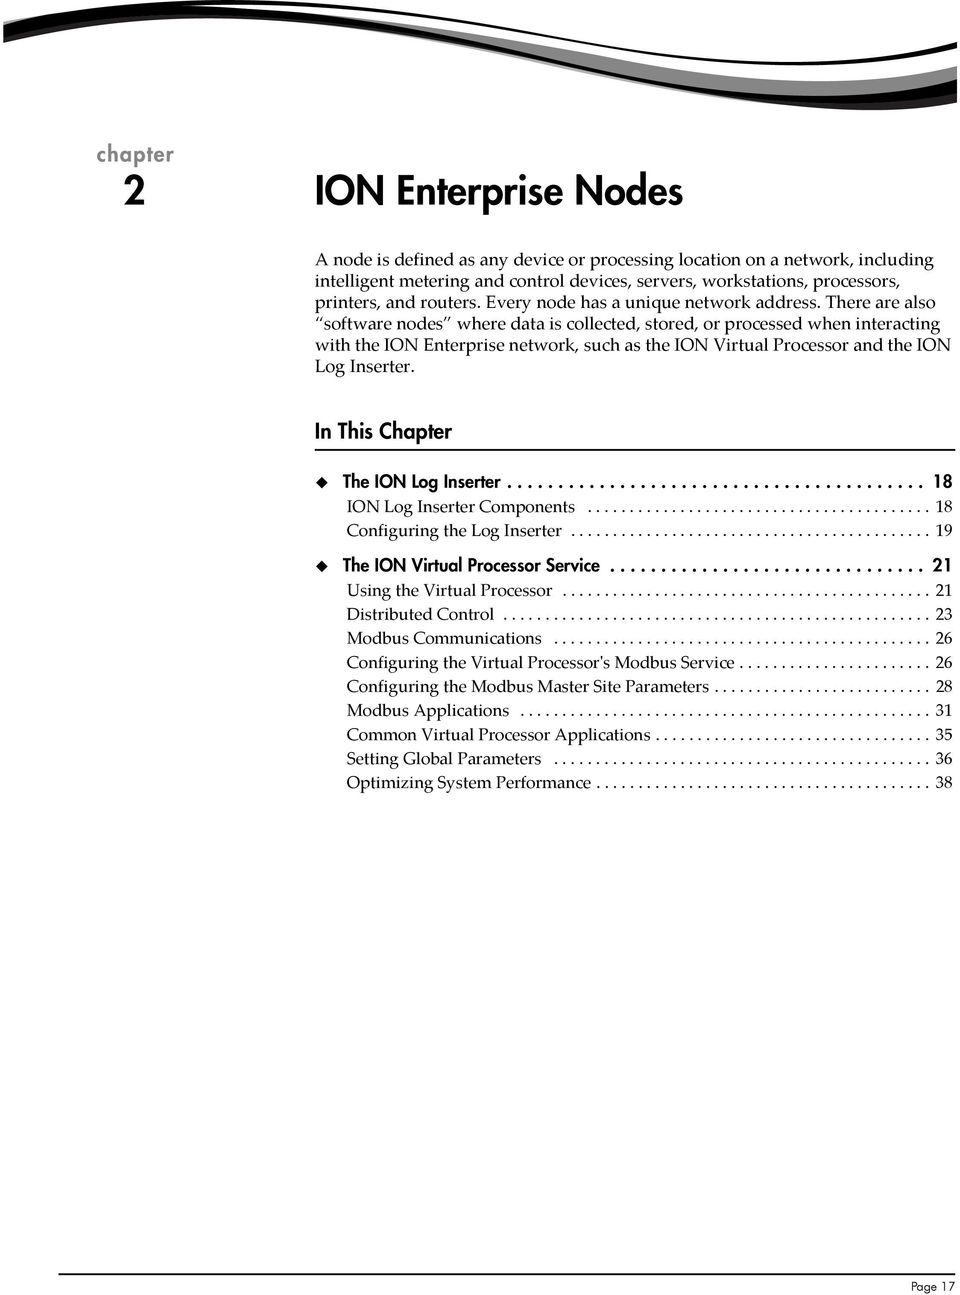 There are also software nodes where data is collected, stored, or processed when interacting with the ION Enterprise network, such as the ION Virtual Processor and the ION Log Inserter.